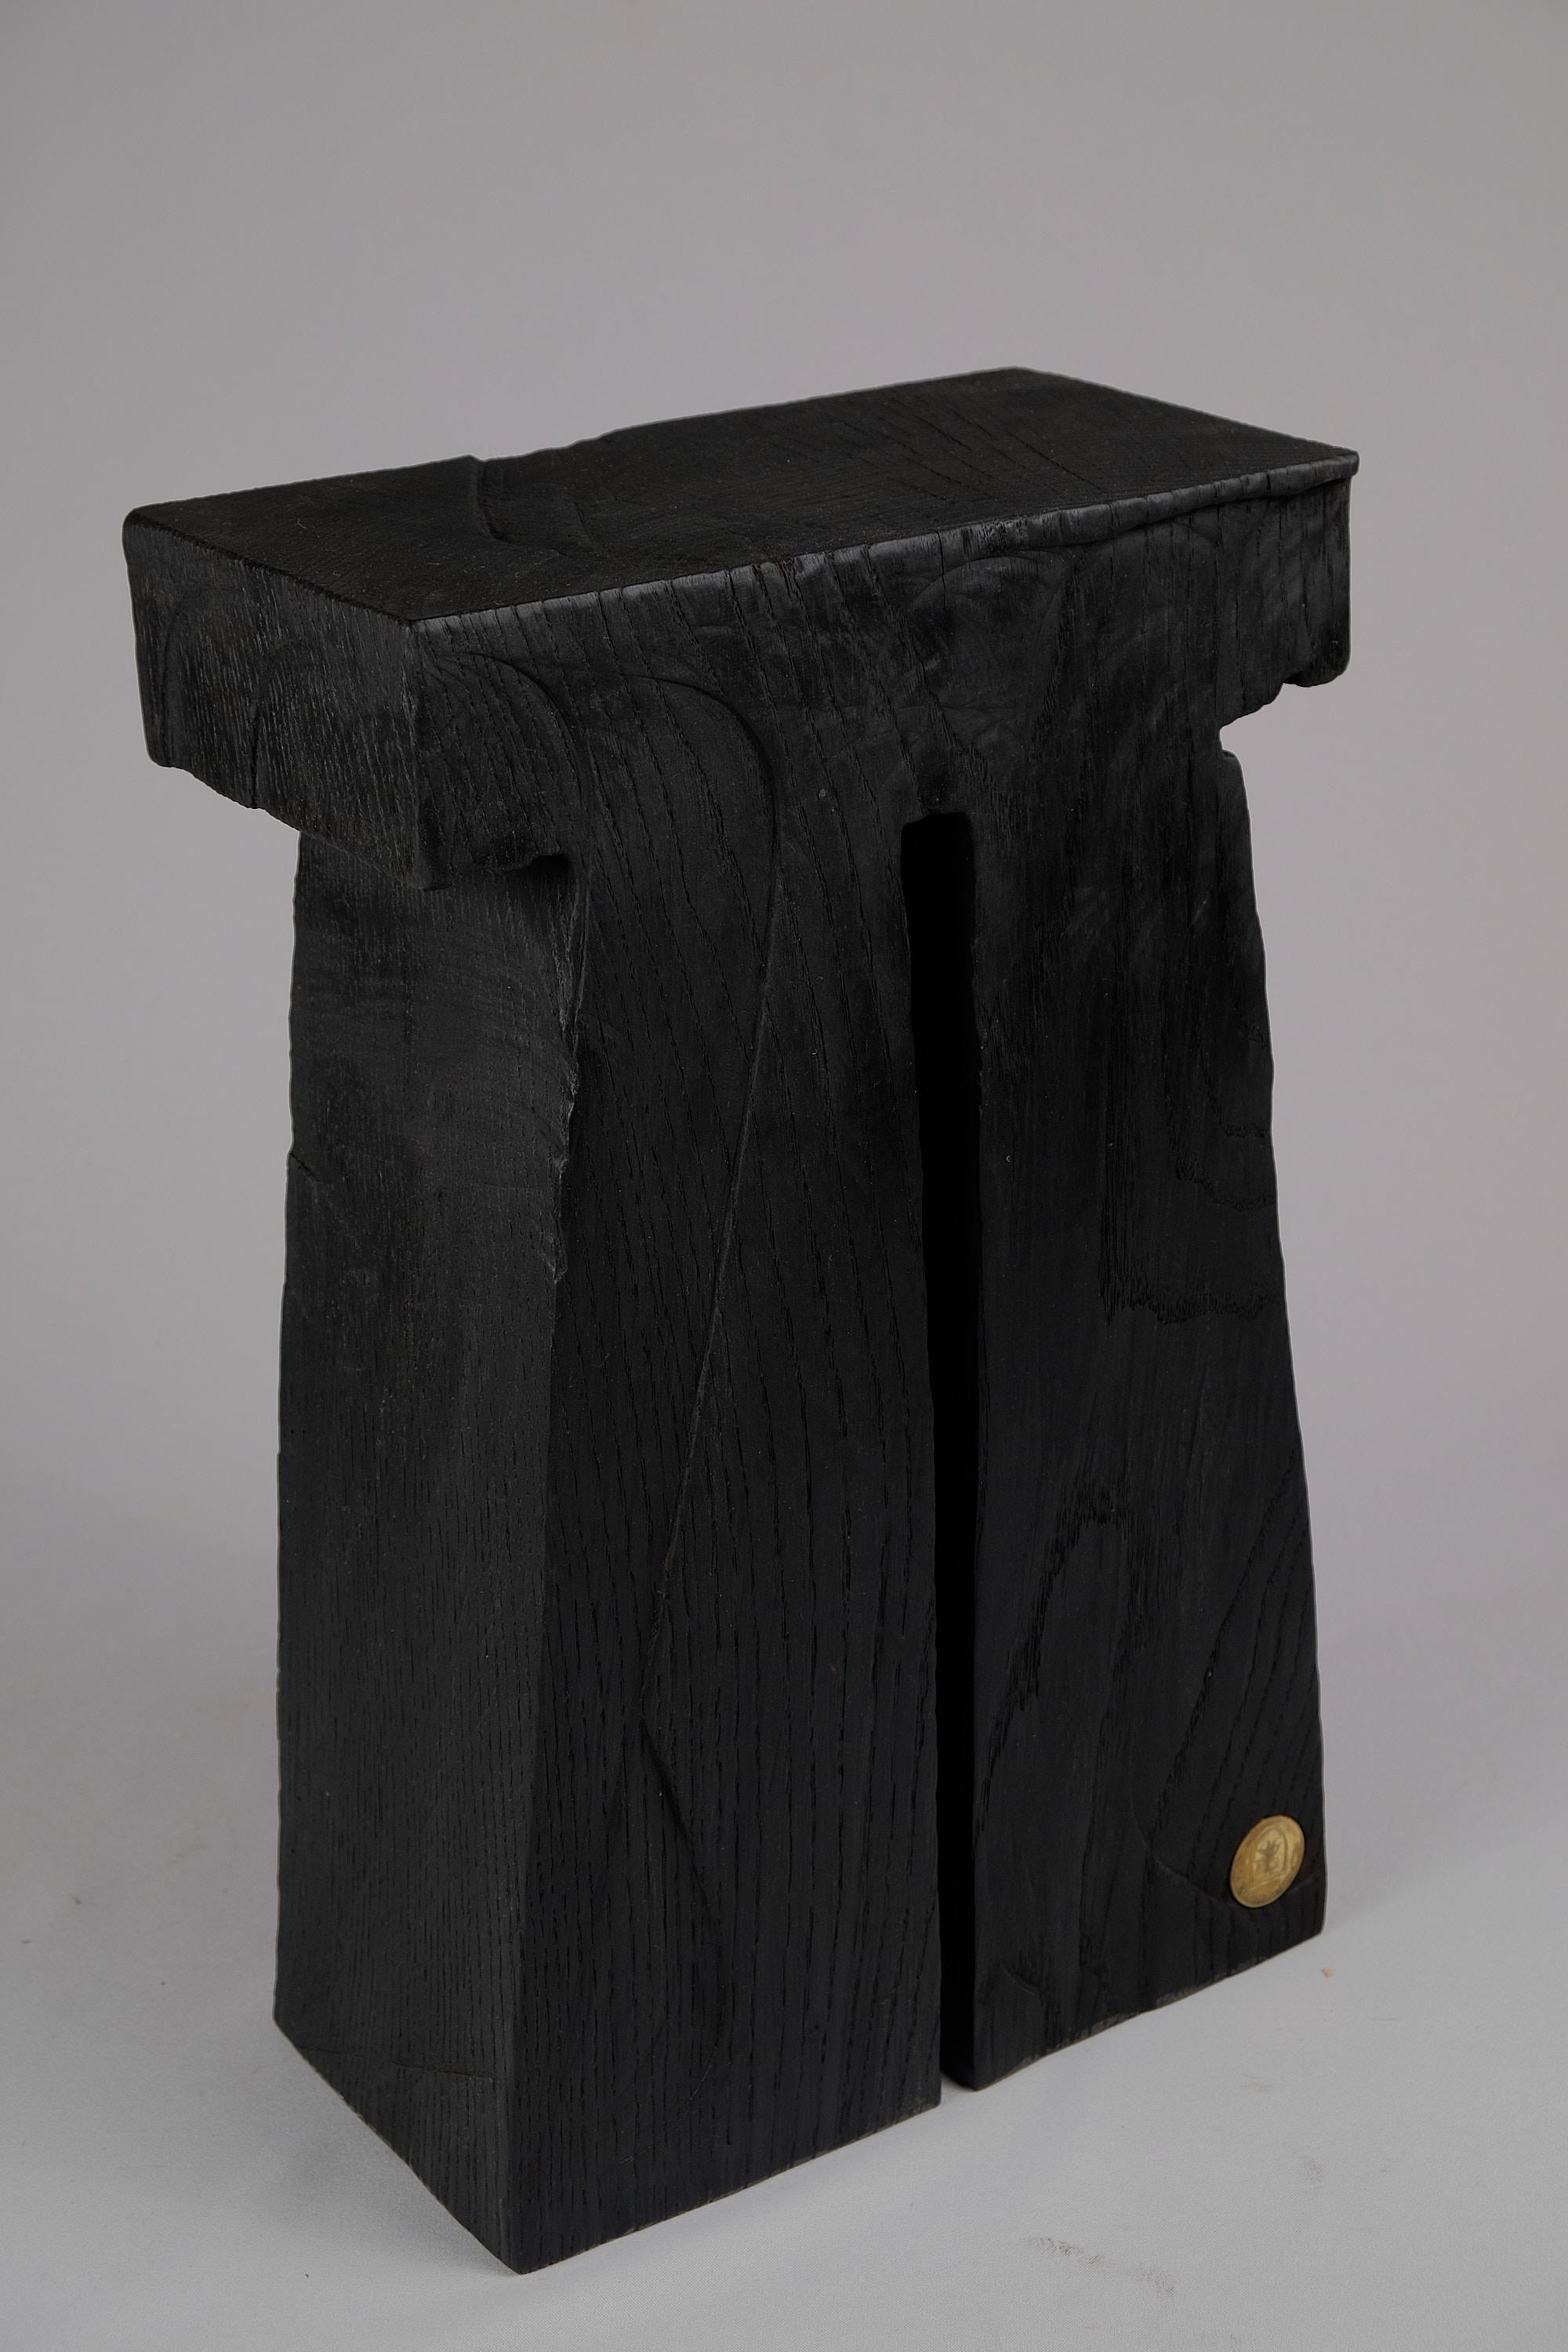 Solid Burnt Wood, Side Table, Stool, Original Contemporary Design, Logniture For Sale 3